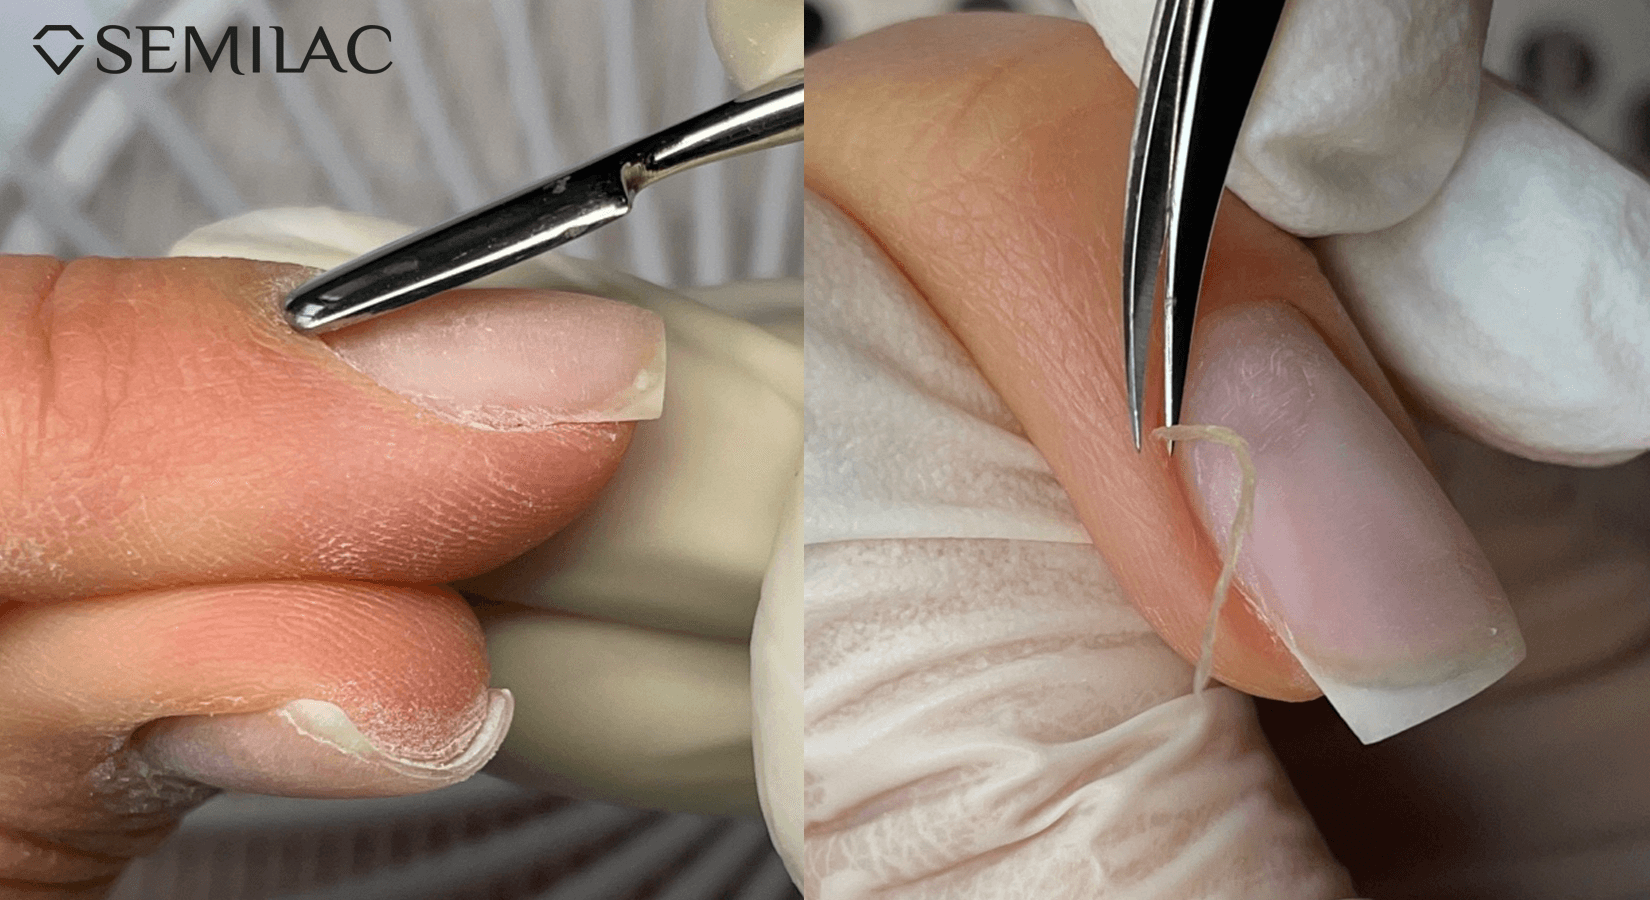 Is cutting cuticles safe?